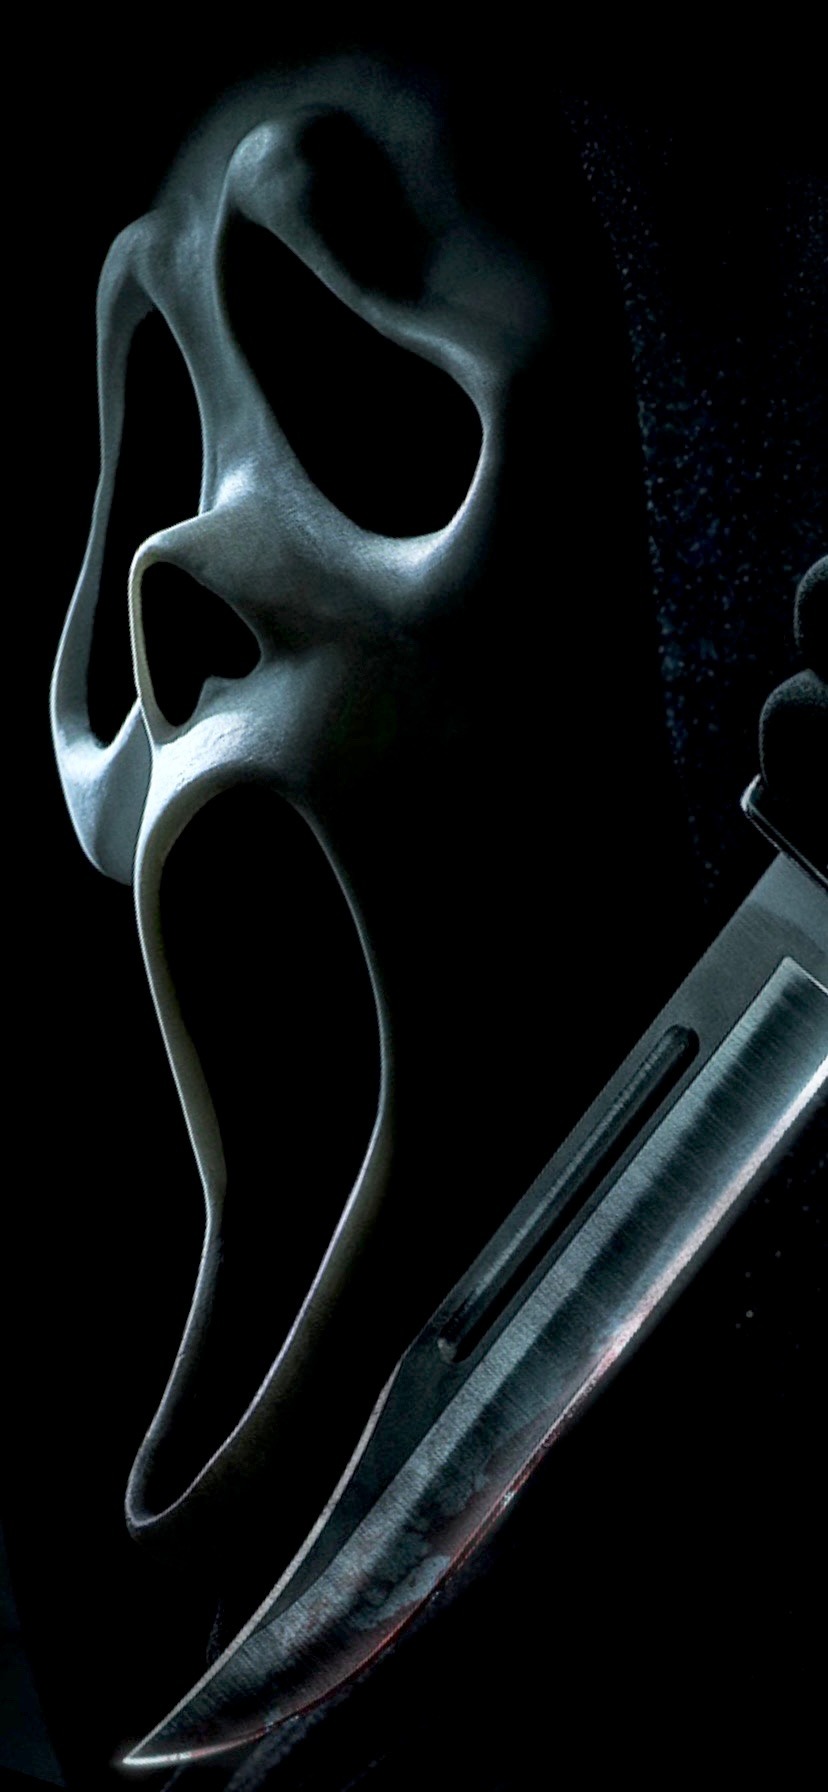 20 Scream 2022 HD Wallpapers and Backgrounds